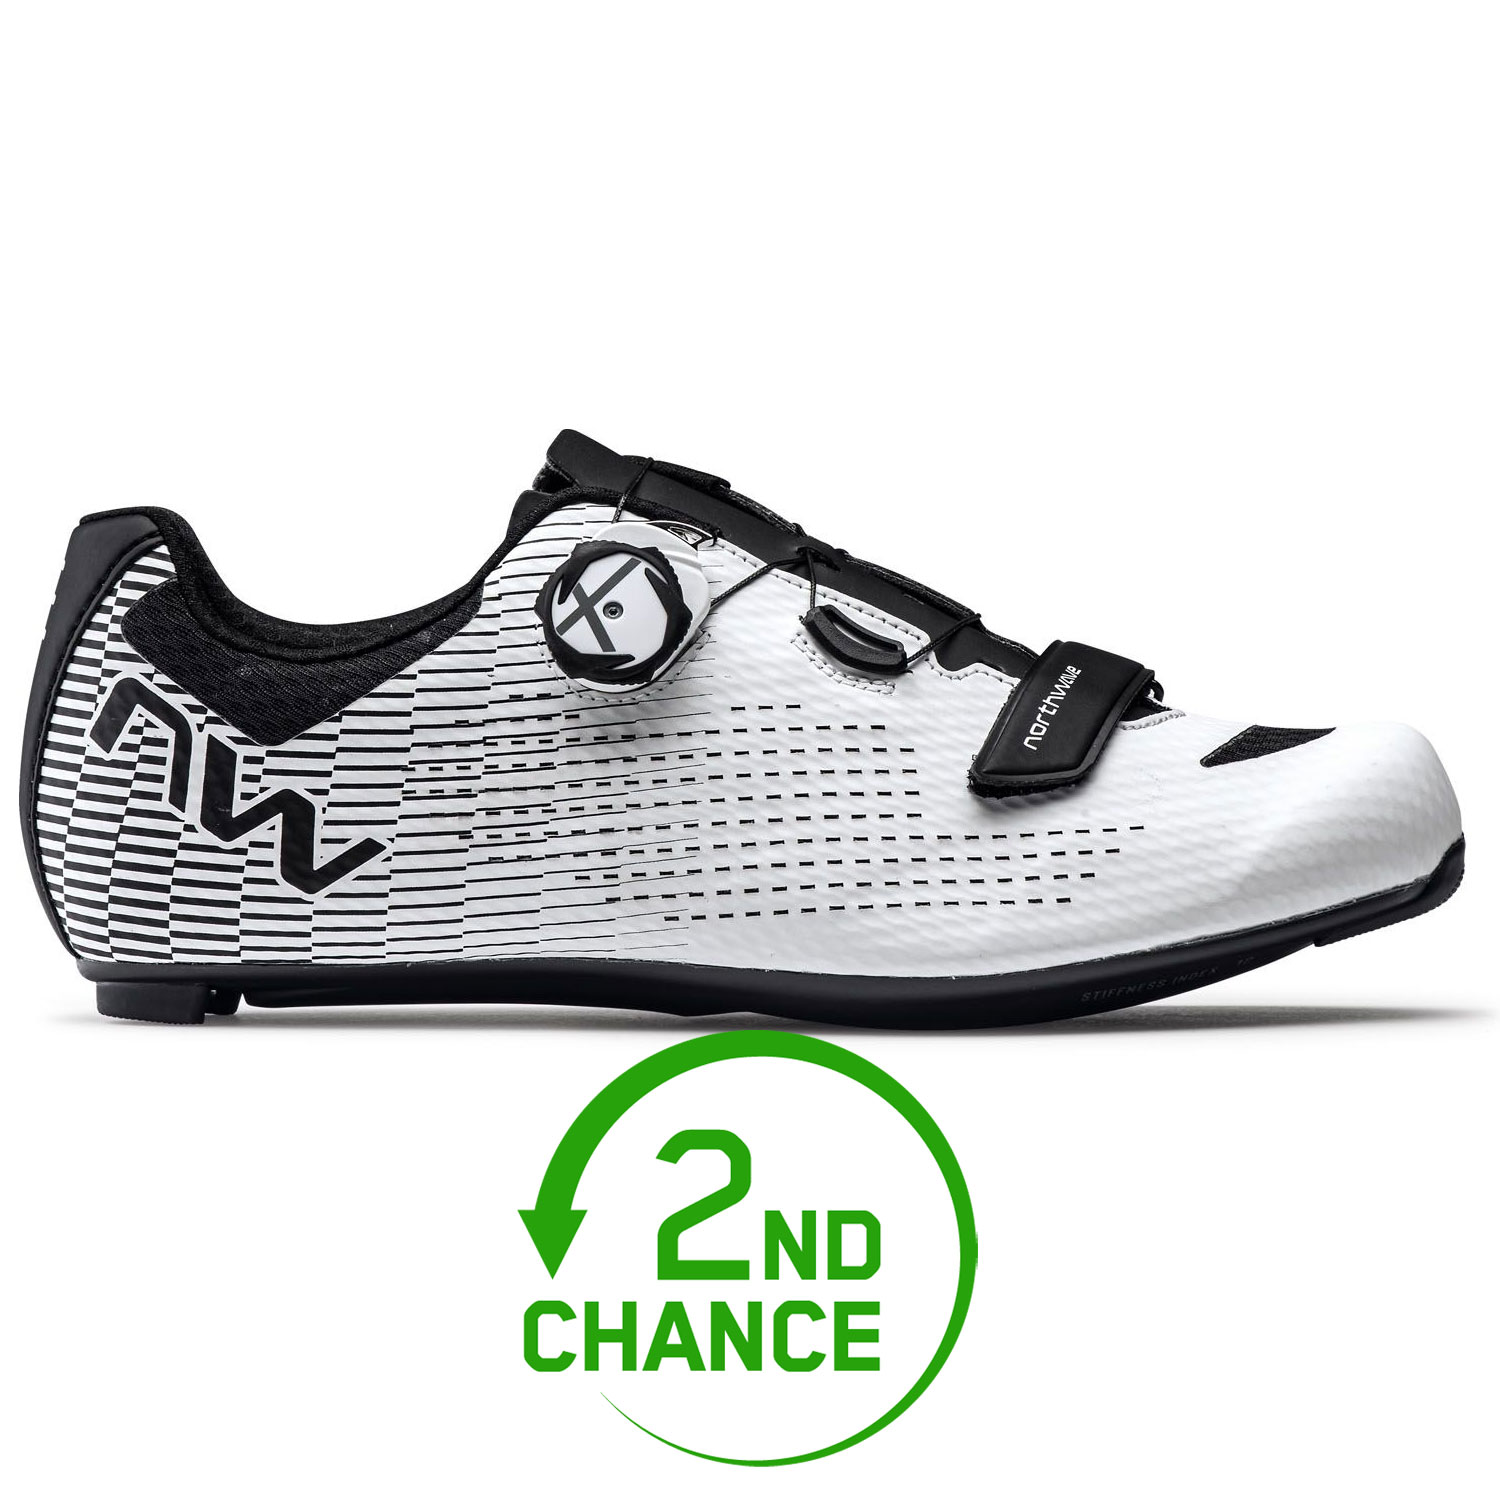 Picture of Northwave Storm Carbon 2 Road Shoes Men - white/black 51 - 2nd Choice